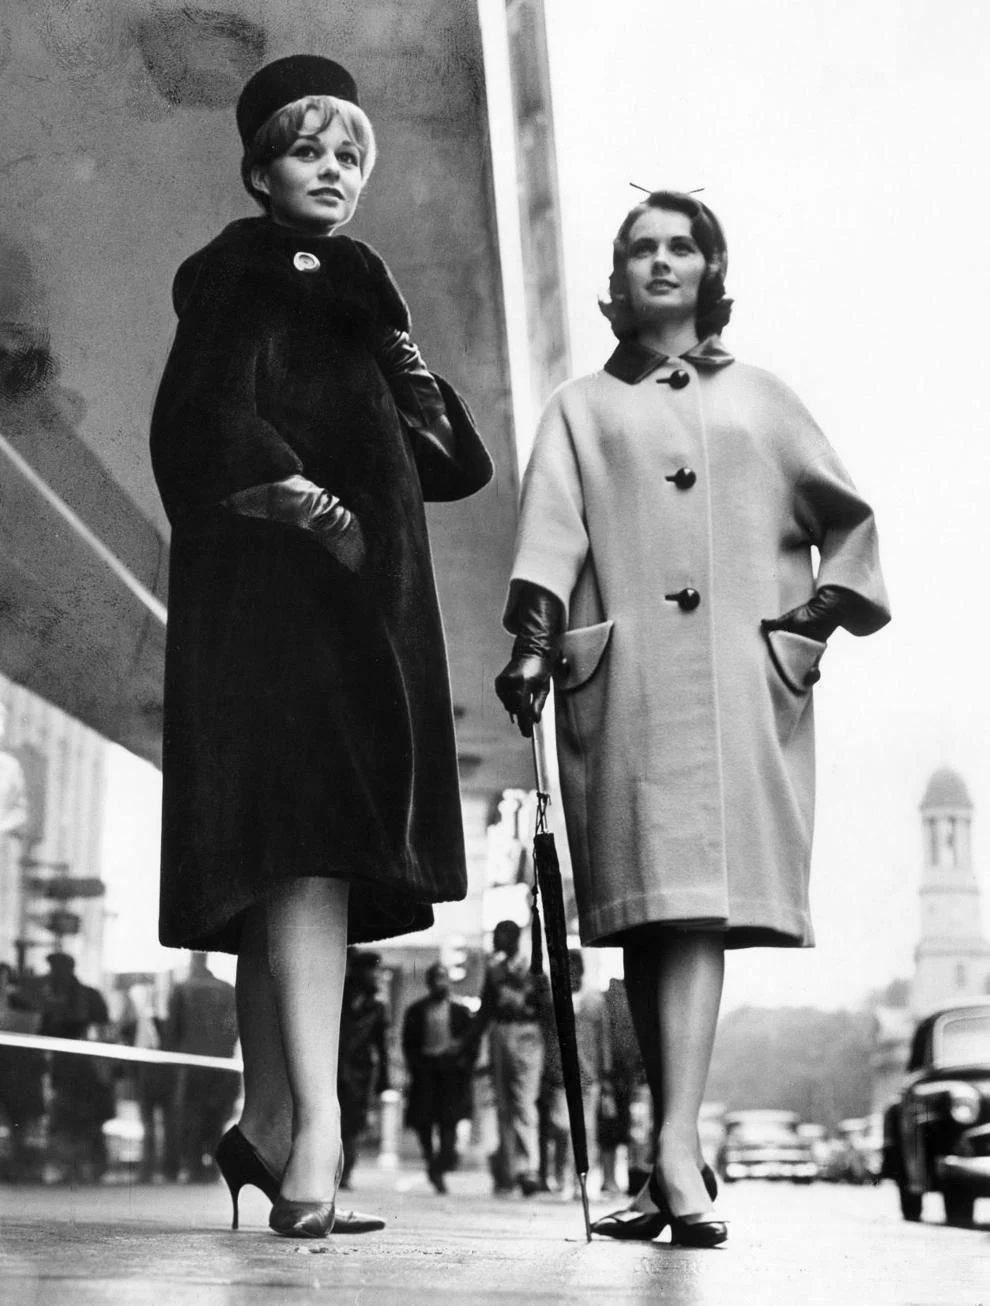 Models showed off new fall fashions available at Richmond department stores Thalhimers and Miller & Rhoads, 1962.